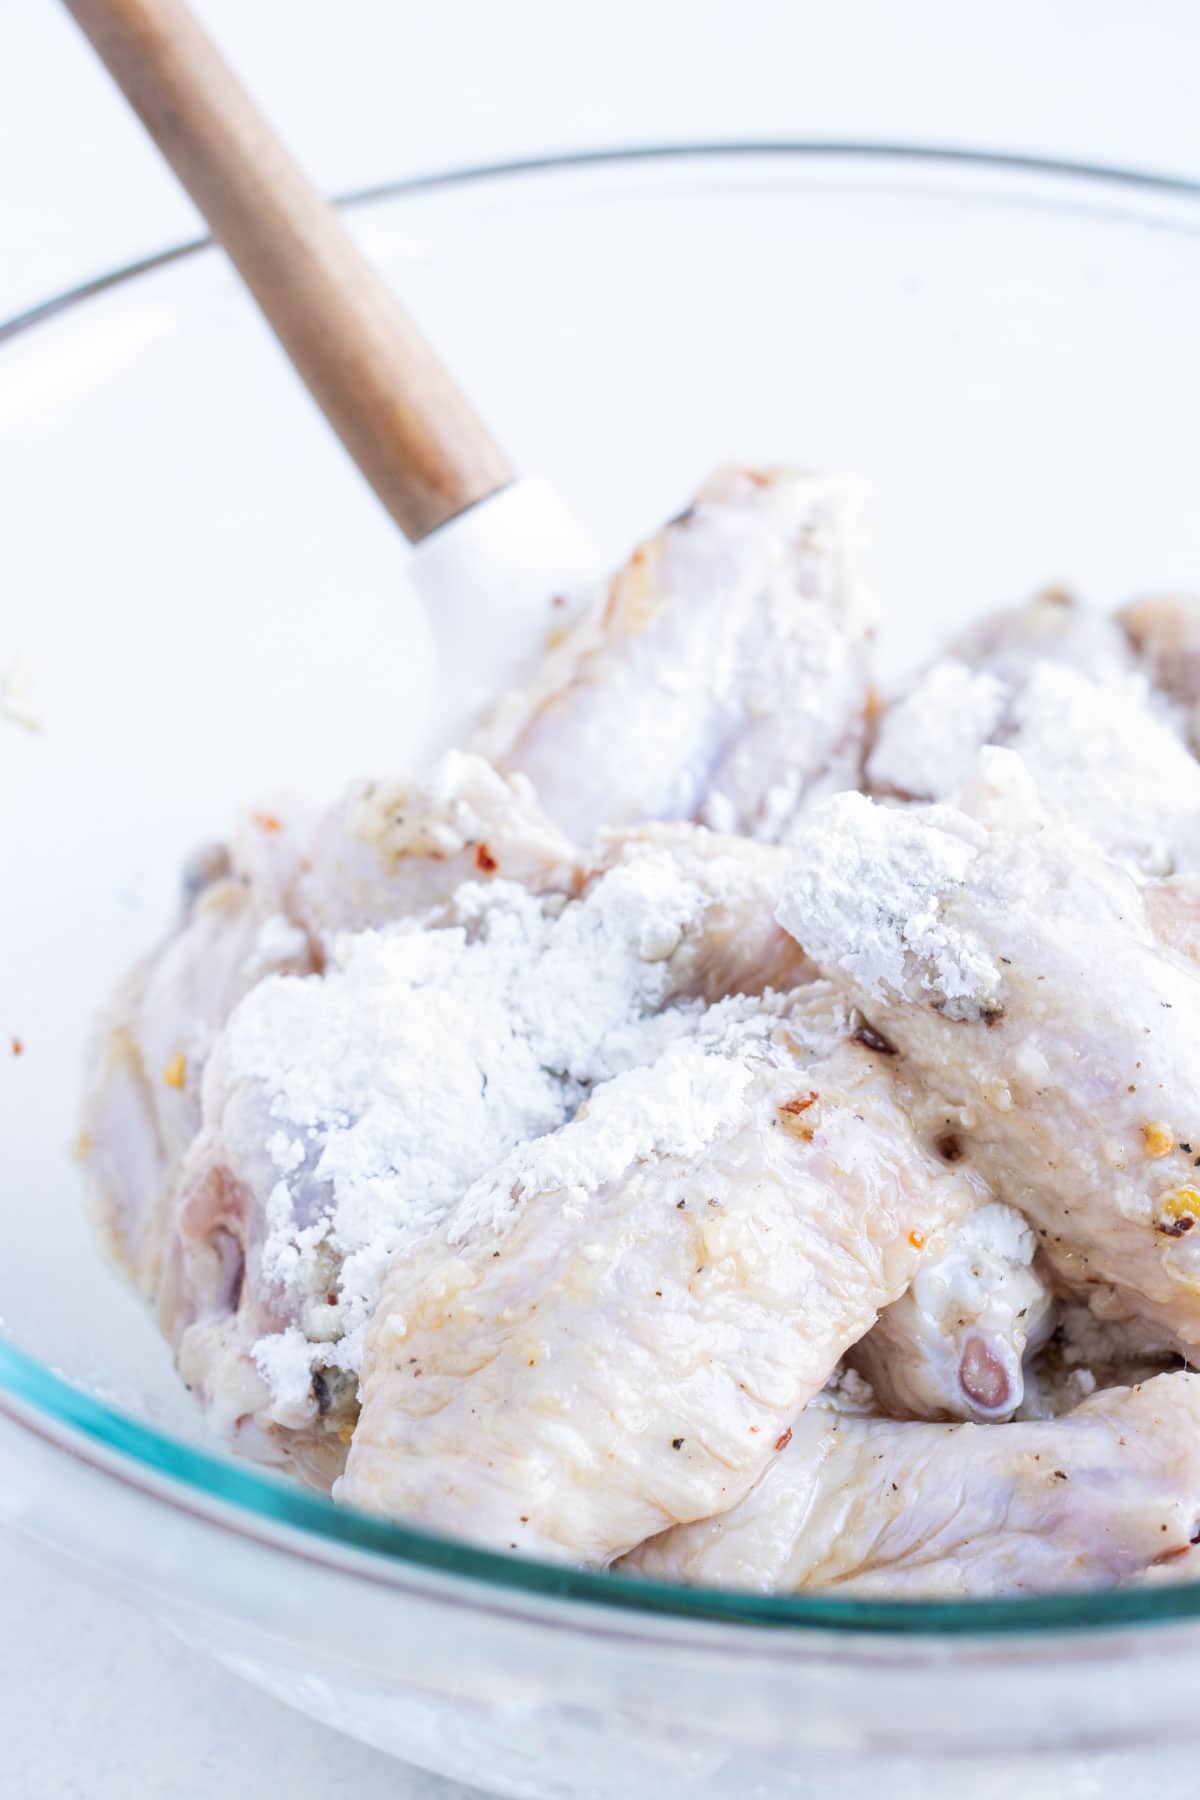 Cornstarch and parmesan are added to the bowl of wings.